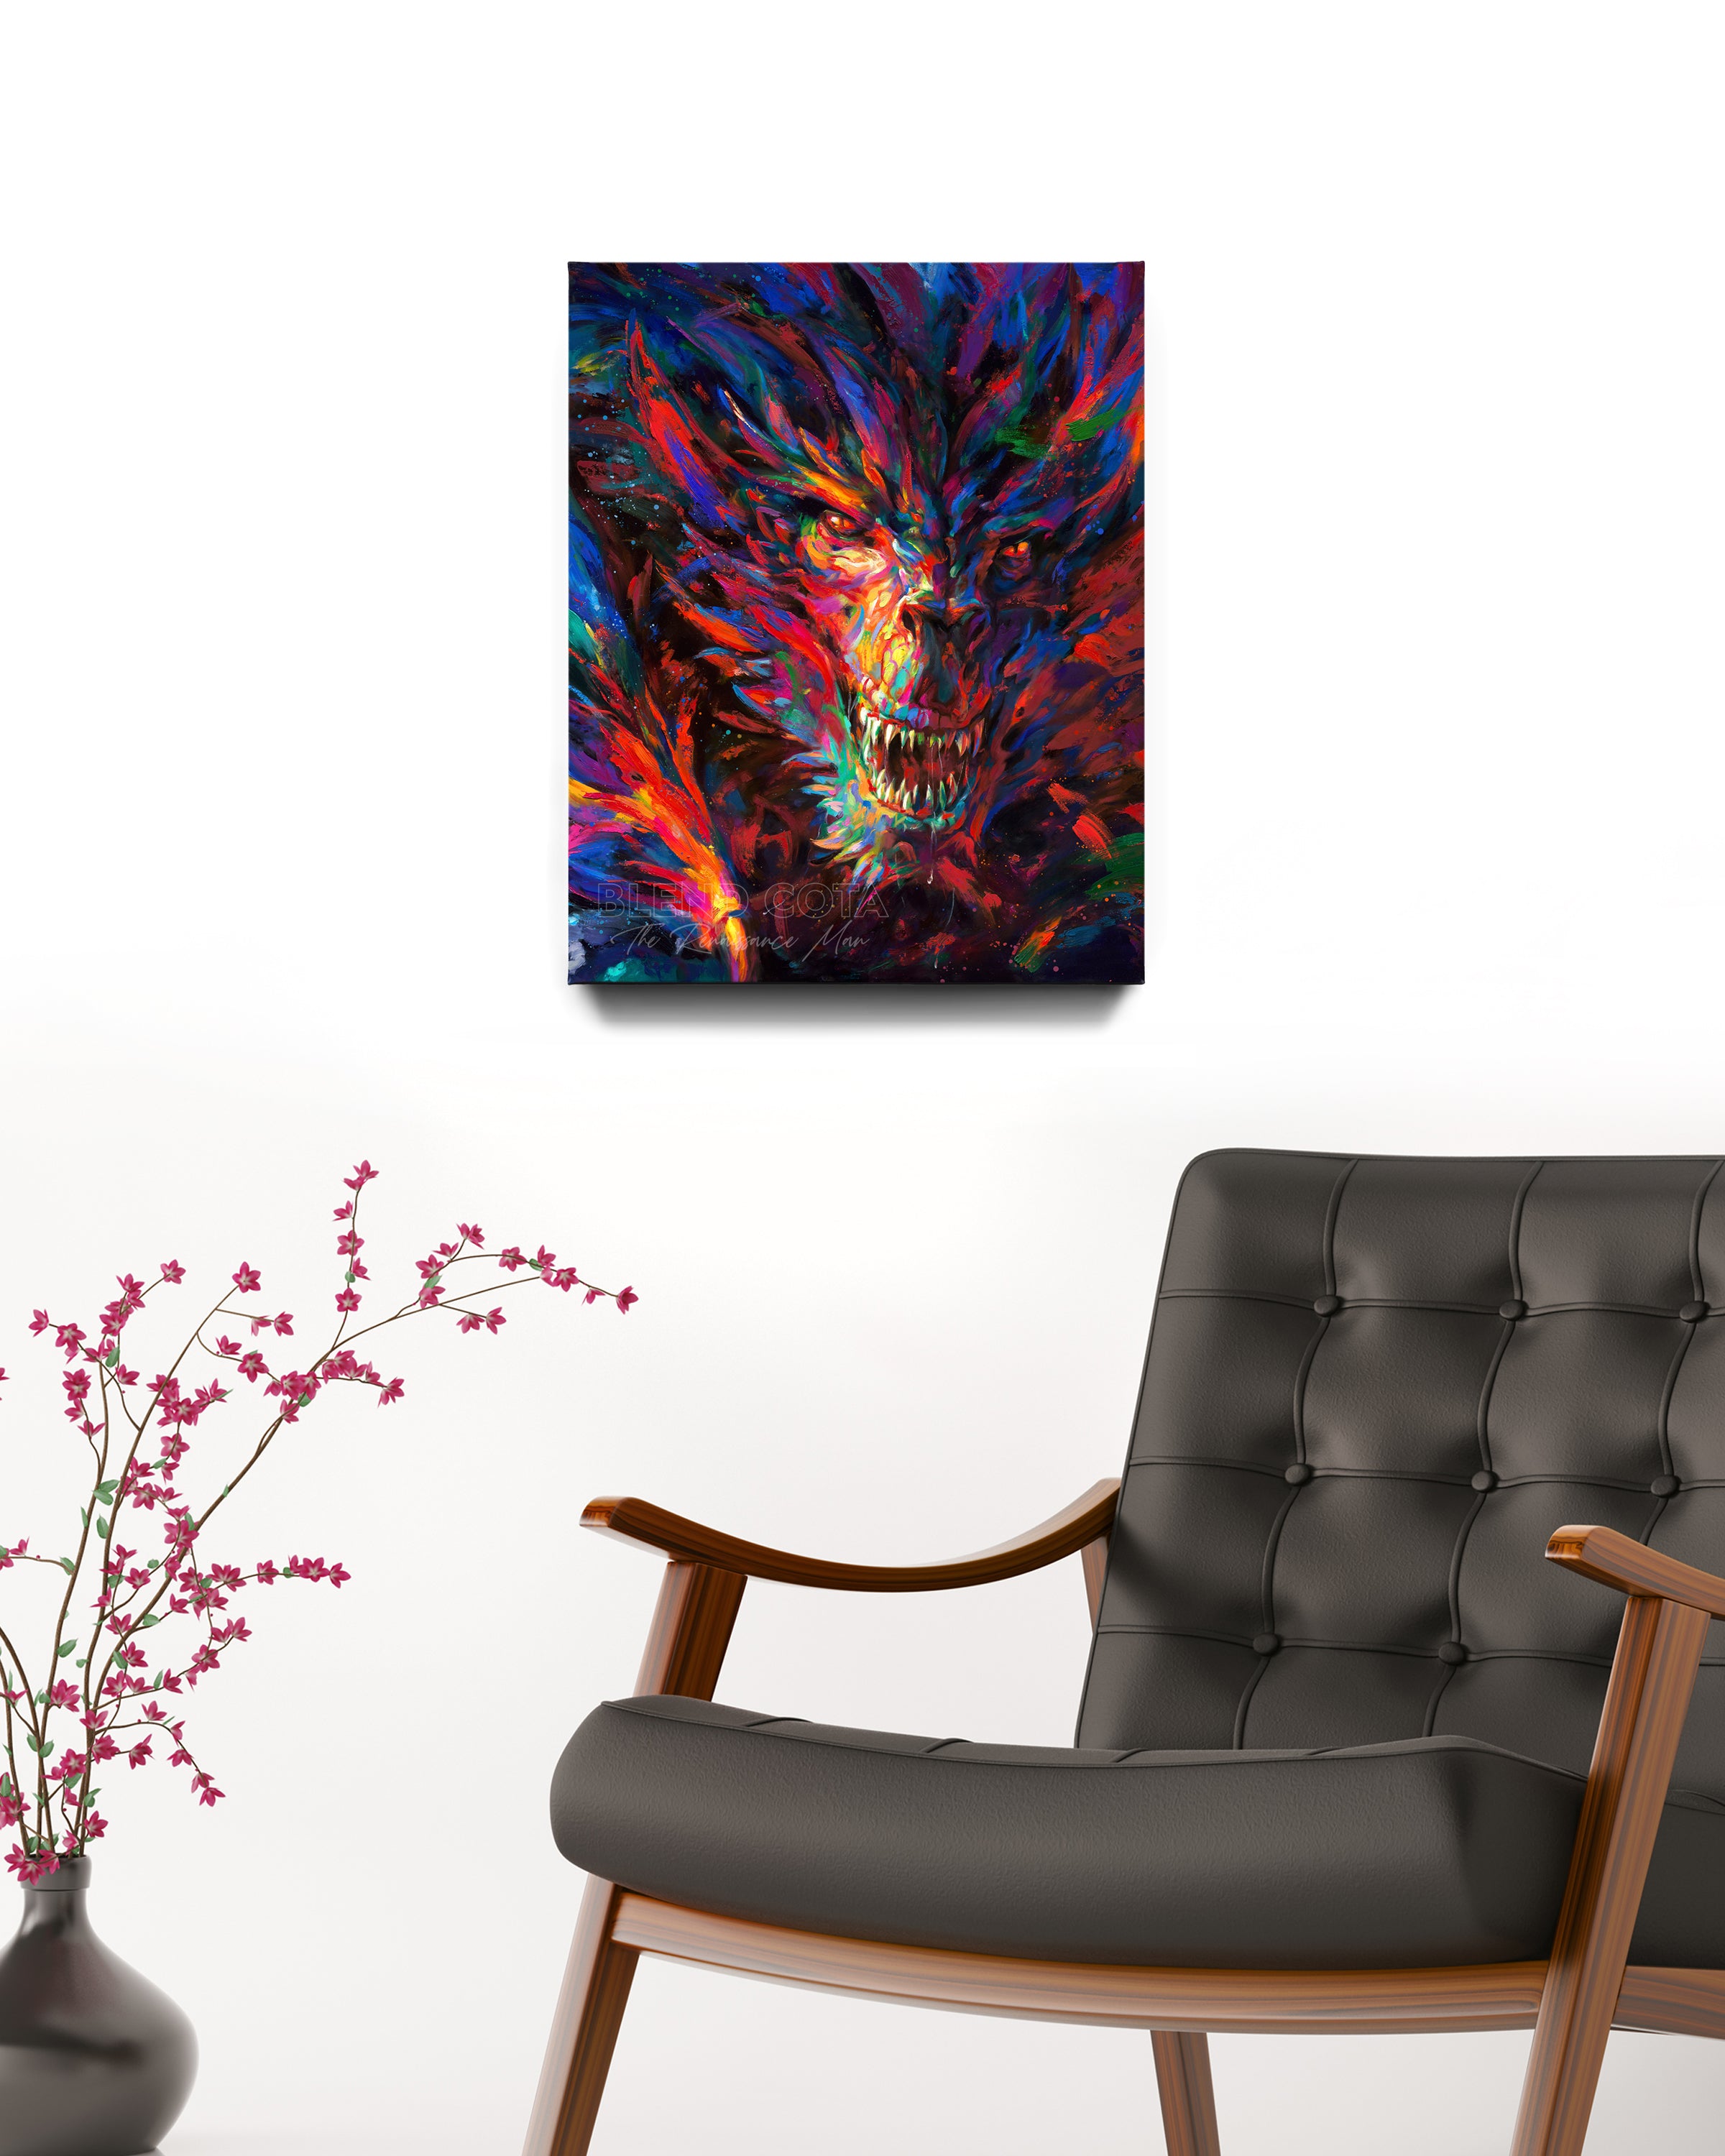 Gallery wrapped art print on canvas of the dragon of war, legendary mythical being engulfed in red and blue flame, emerging from darkness with colorful brushstrokes in an expressionistic style in a room setting.